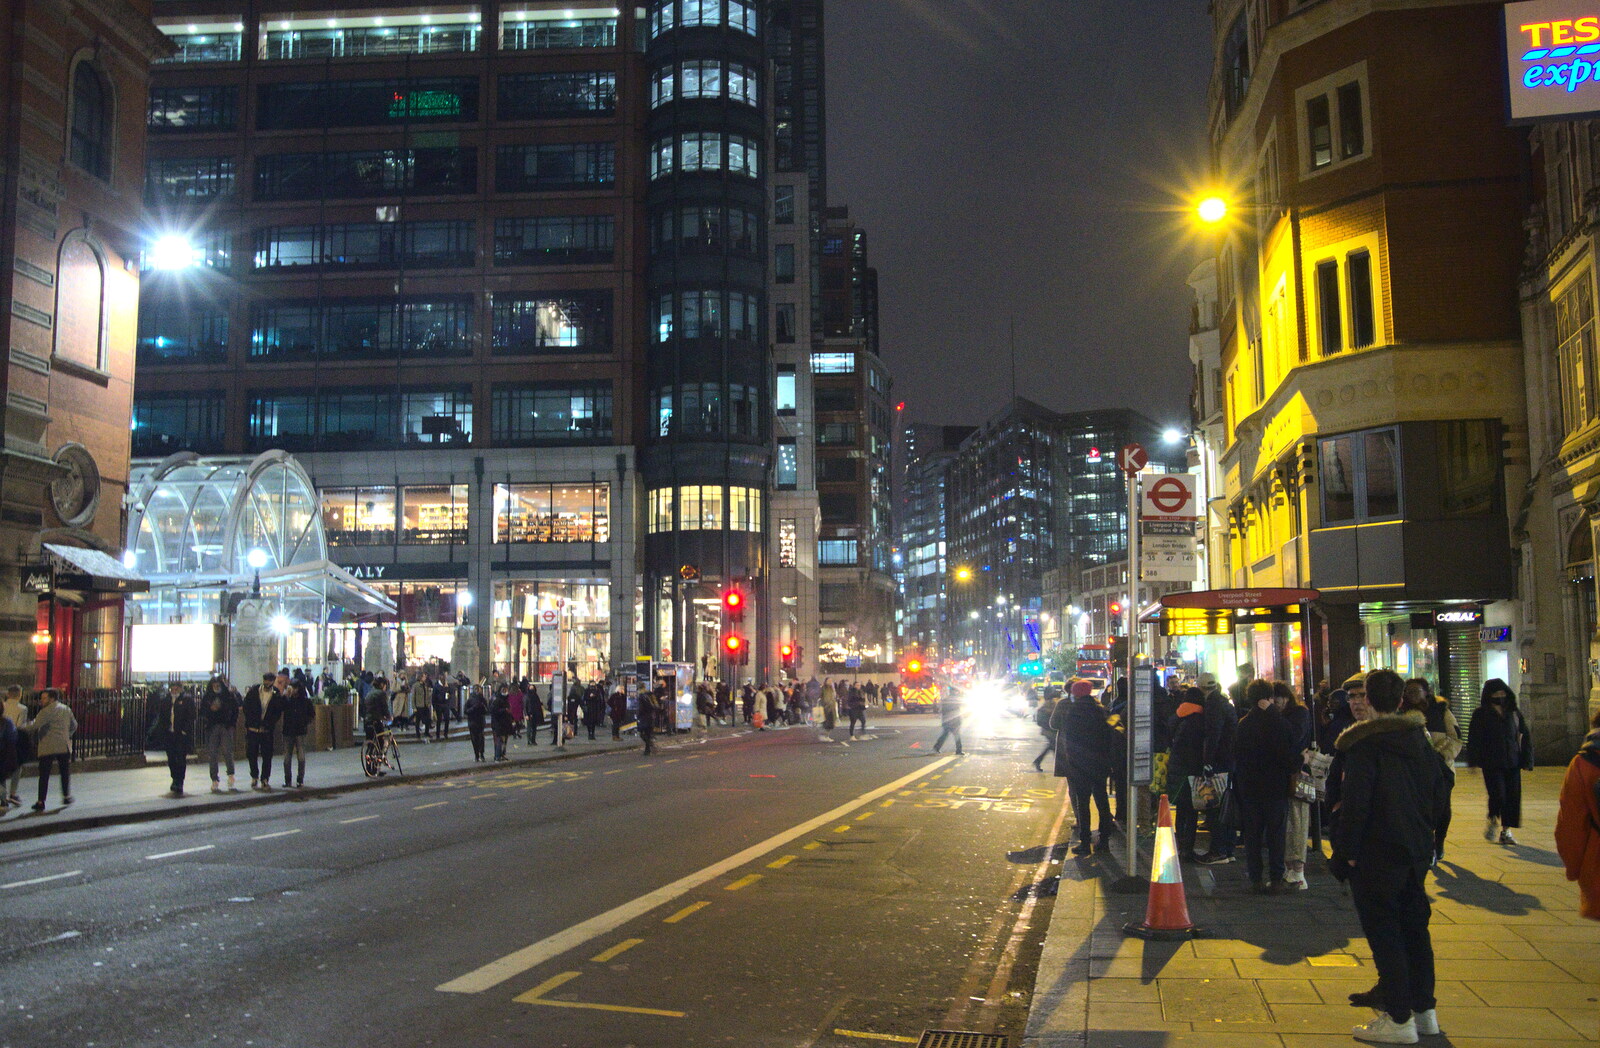 Outside on Bishopsgate from A Trip to the Natural History Museum, Kensington, London - 15th January 2022